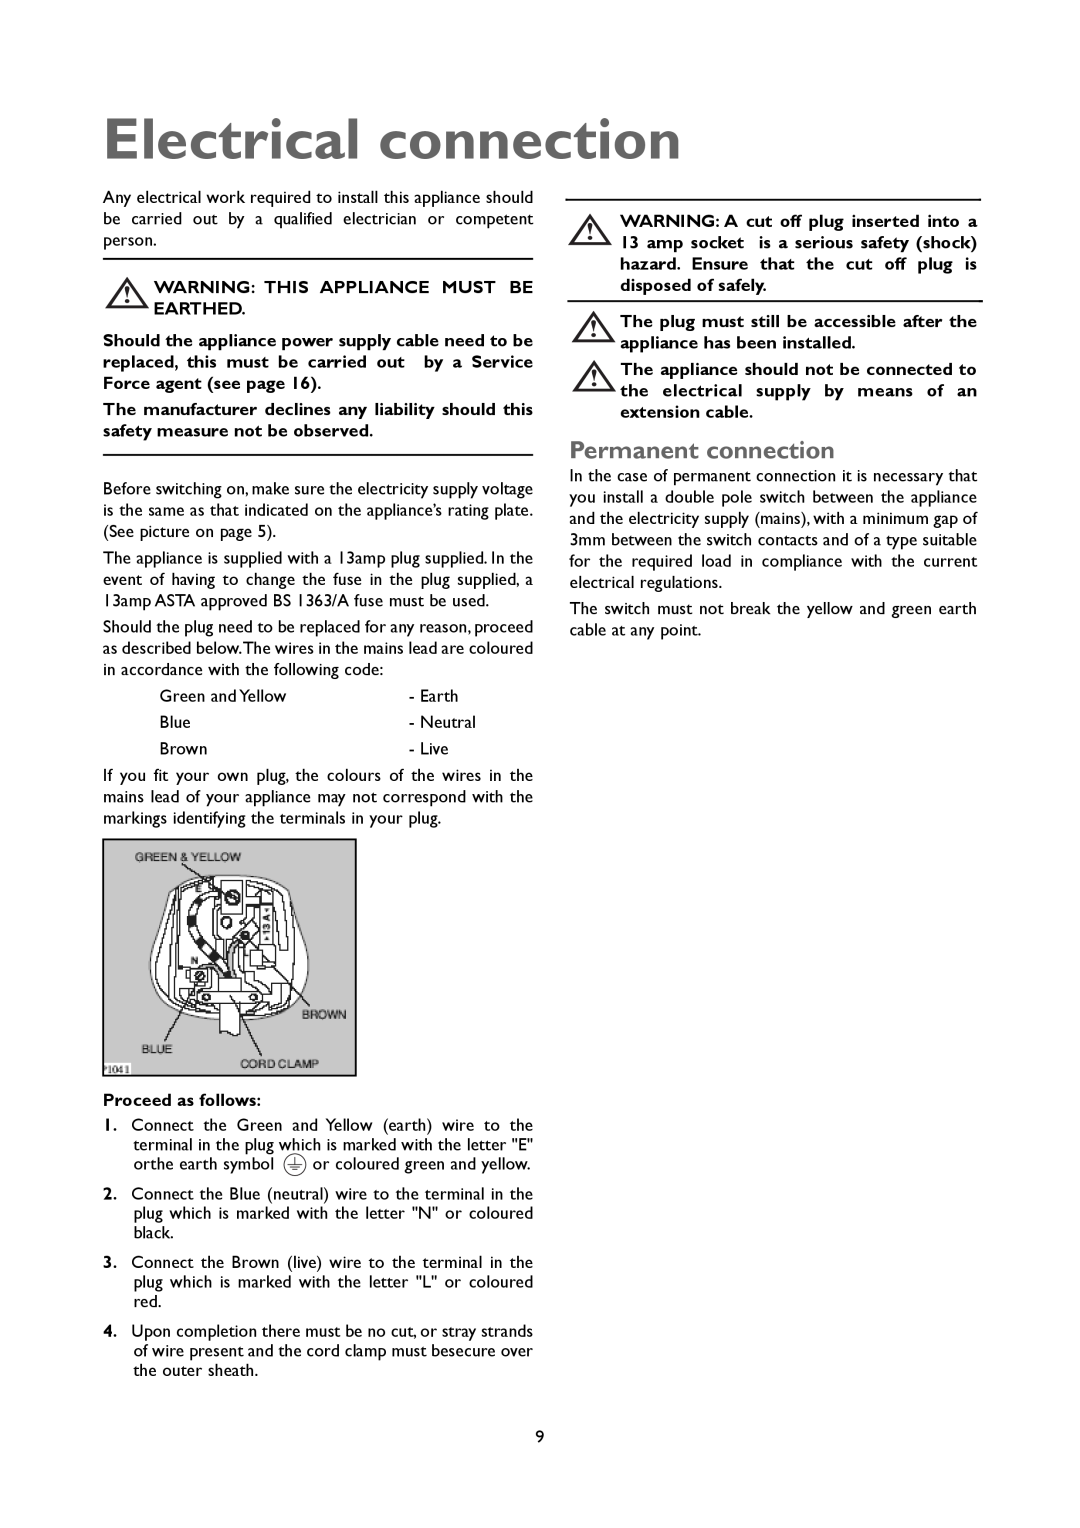 John Lewis JLUCLFW6003 instruction manual Electrical connection, Permanent connection 